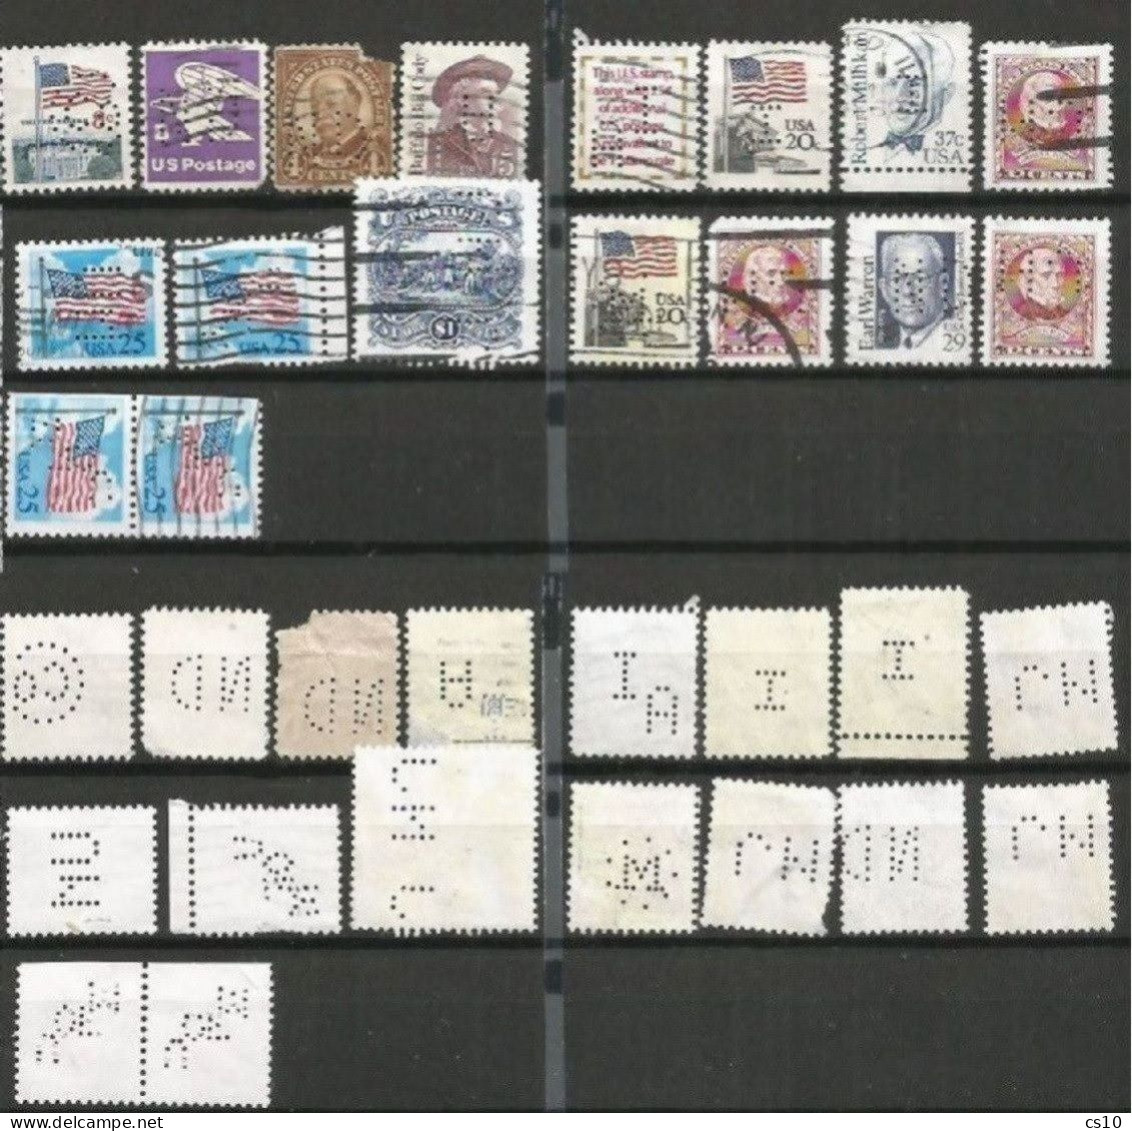 USA Perfins Small Lot Of 130 Pcs 7 Scans Incl. PPC Iowa University And Some Piece Incl. Stationery7 - Perforados